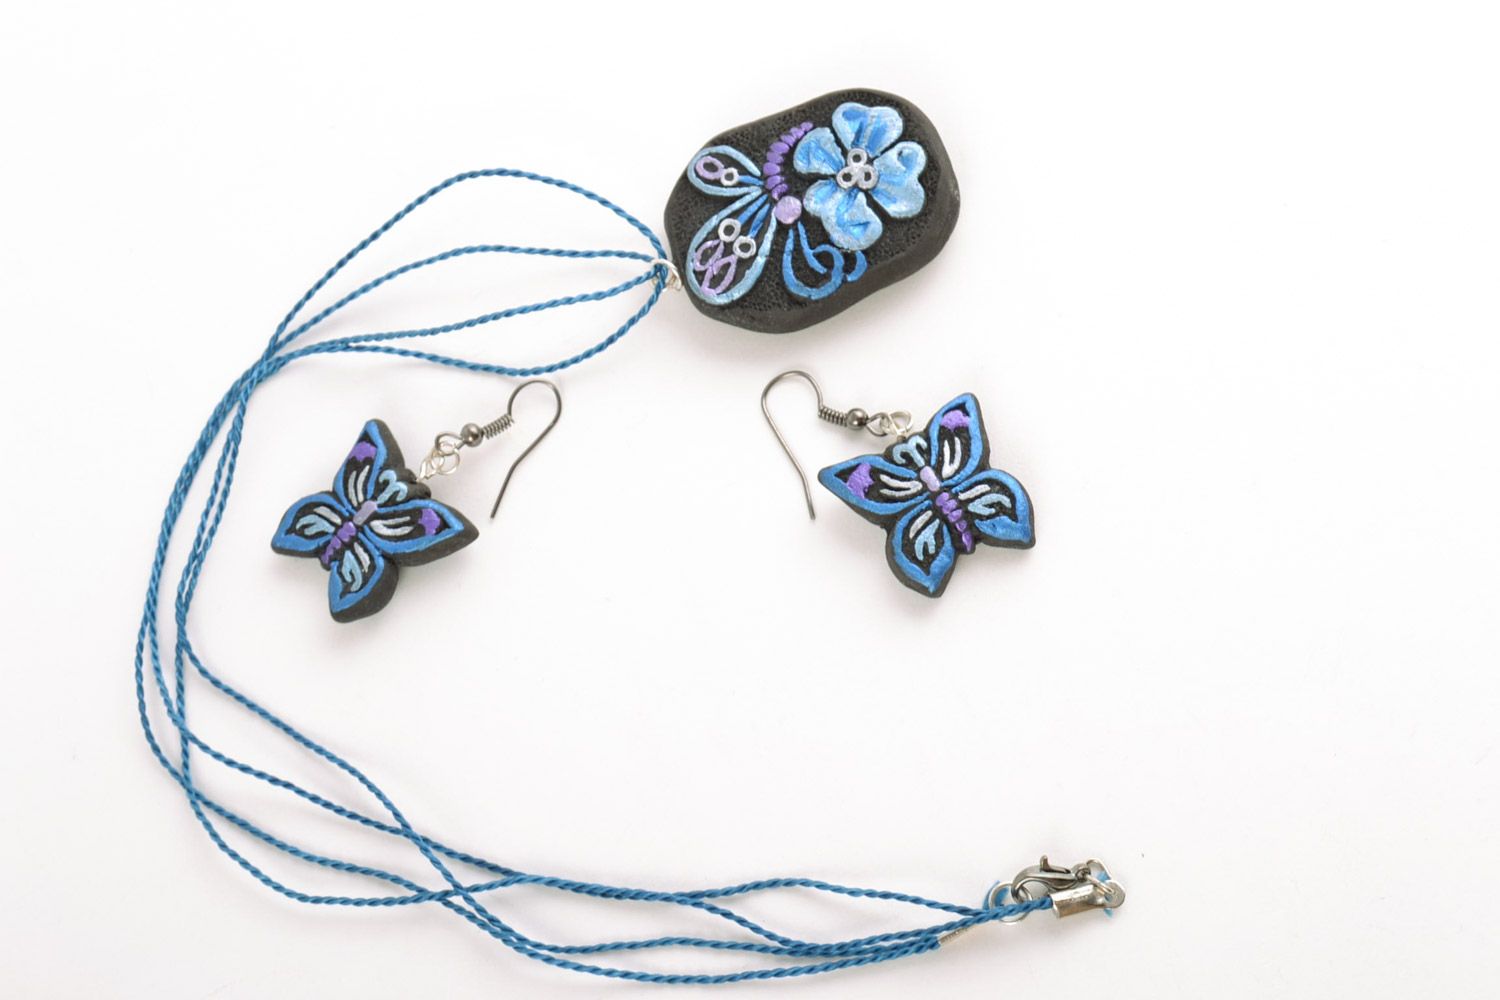 Handmade painted ceramic jewelry set 2 items clay earrings and pendant in the shape of butterflies photo 5